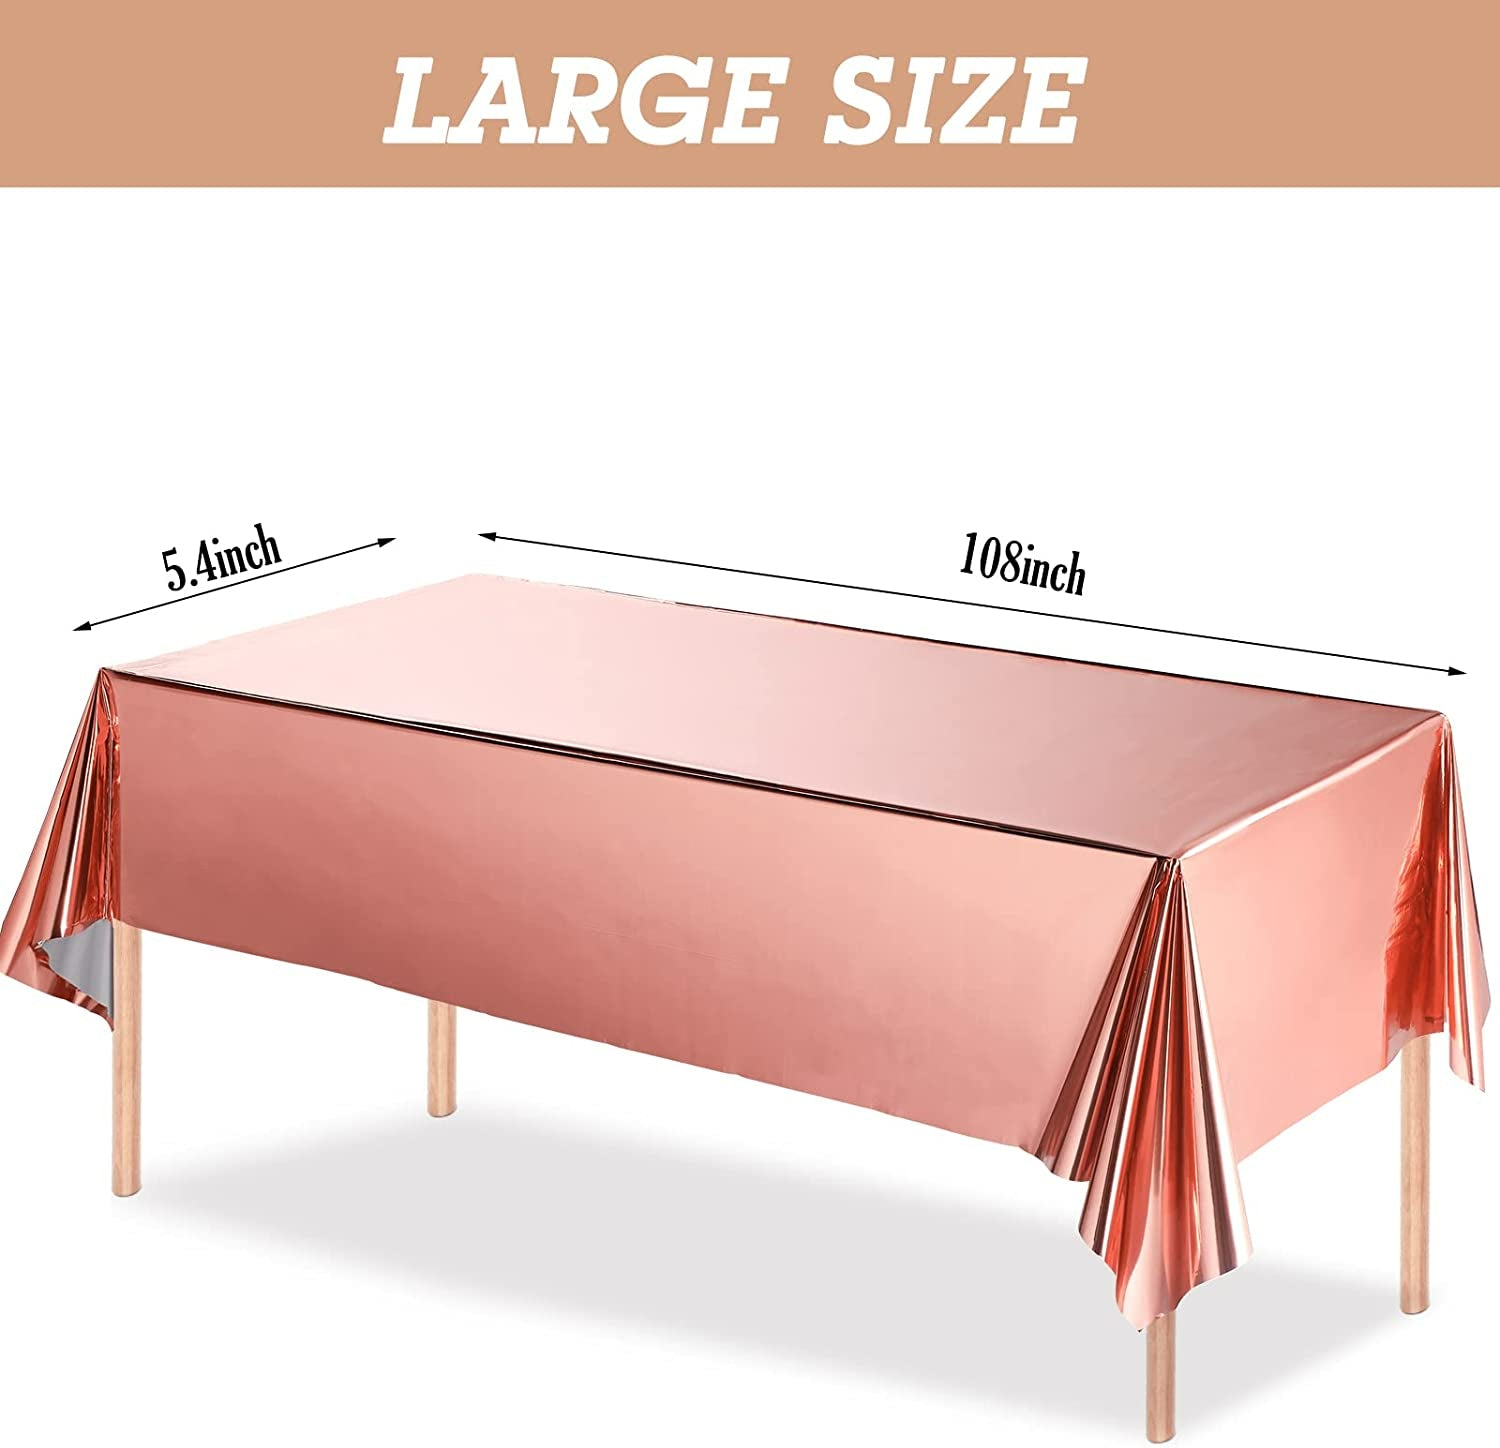 Metallic Tablecloth Disposable Foil Tablecloth Waterproof Shiny Plastic Table Cover Wedding Anniversary Birthday Party Decoration